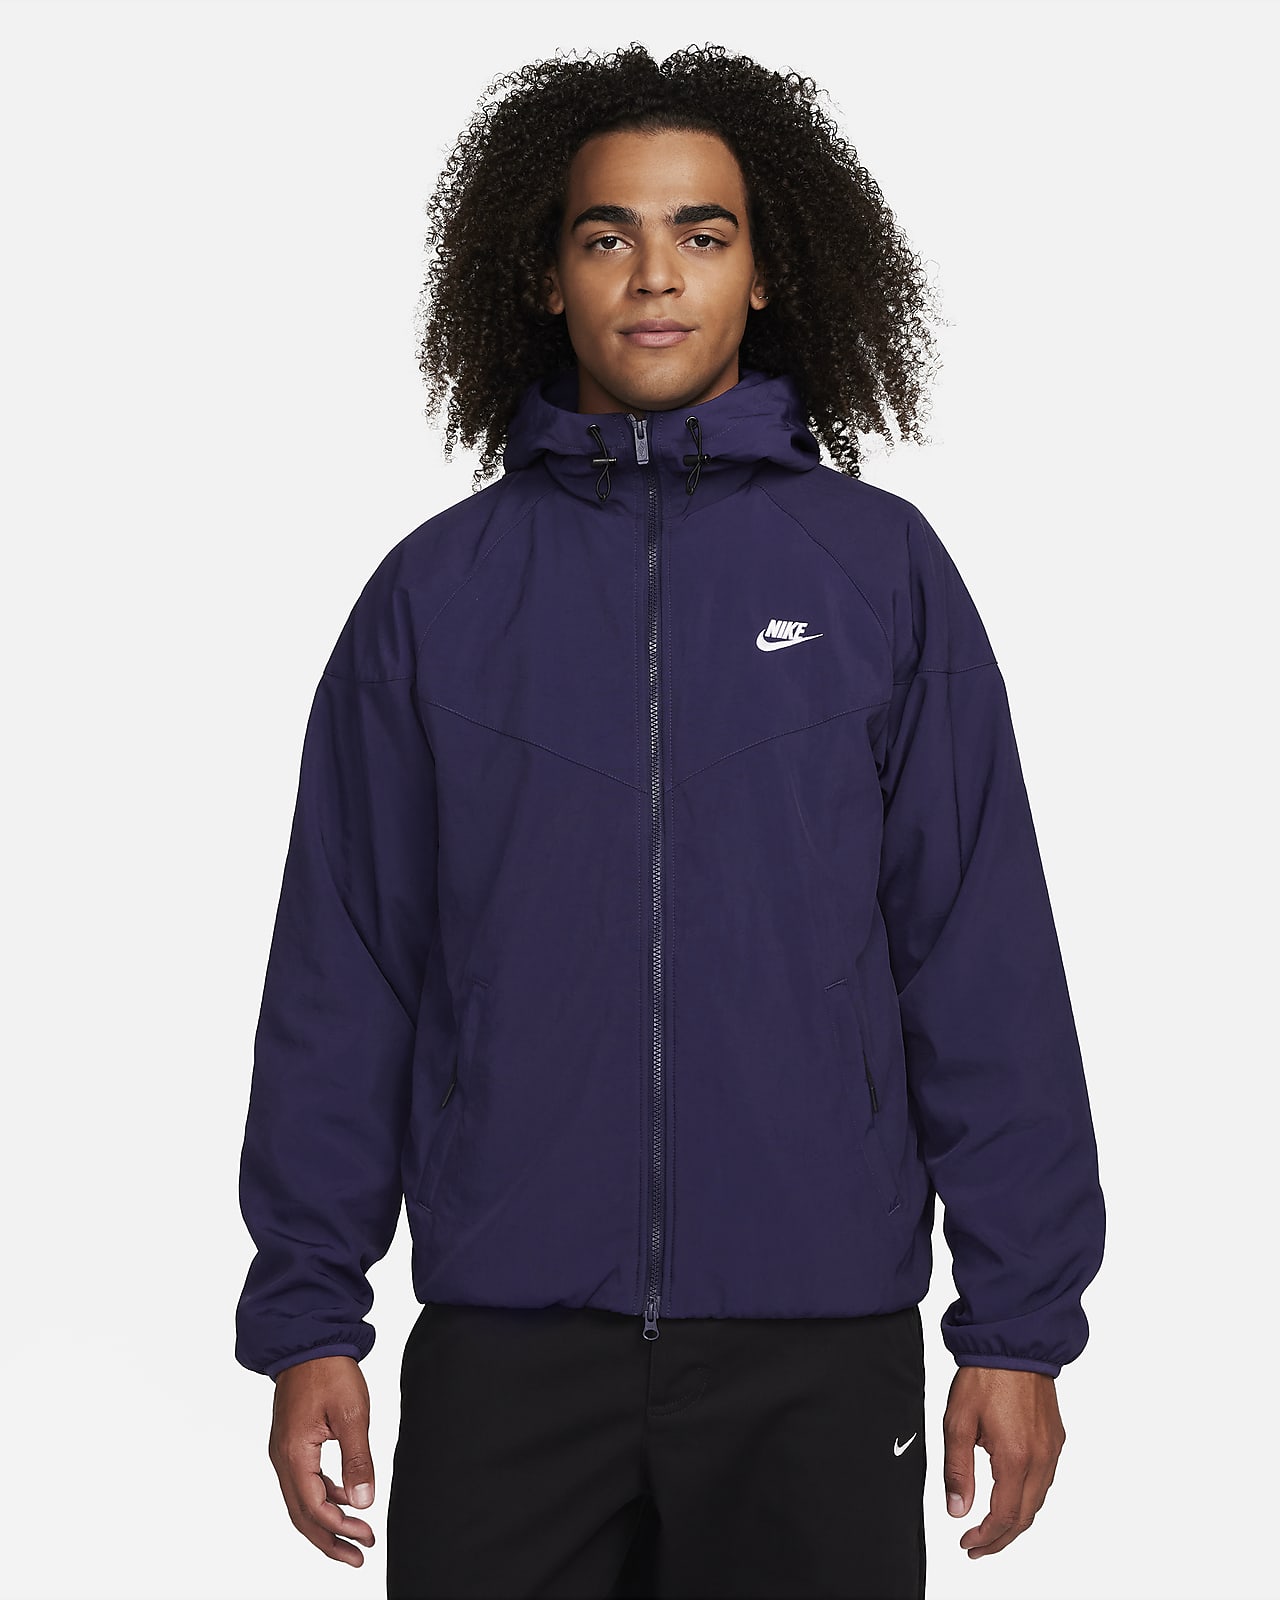 https://static.nike.com/a/images/t_PDP_1280_v1/f_auto,q_auto:eco/22bbea56-b5ae-4ccc-9095-4f477a3a4b89/sportswear-windrunner-loose-hooded-jacket-vqnfHS.png